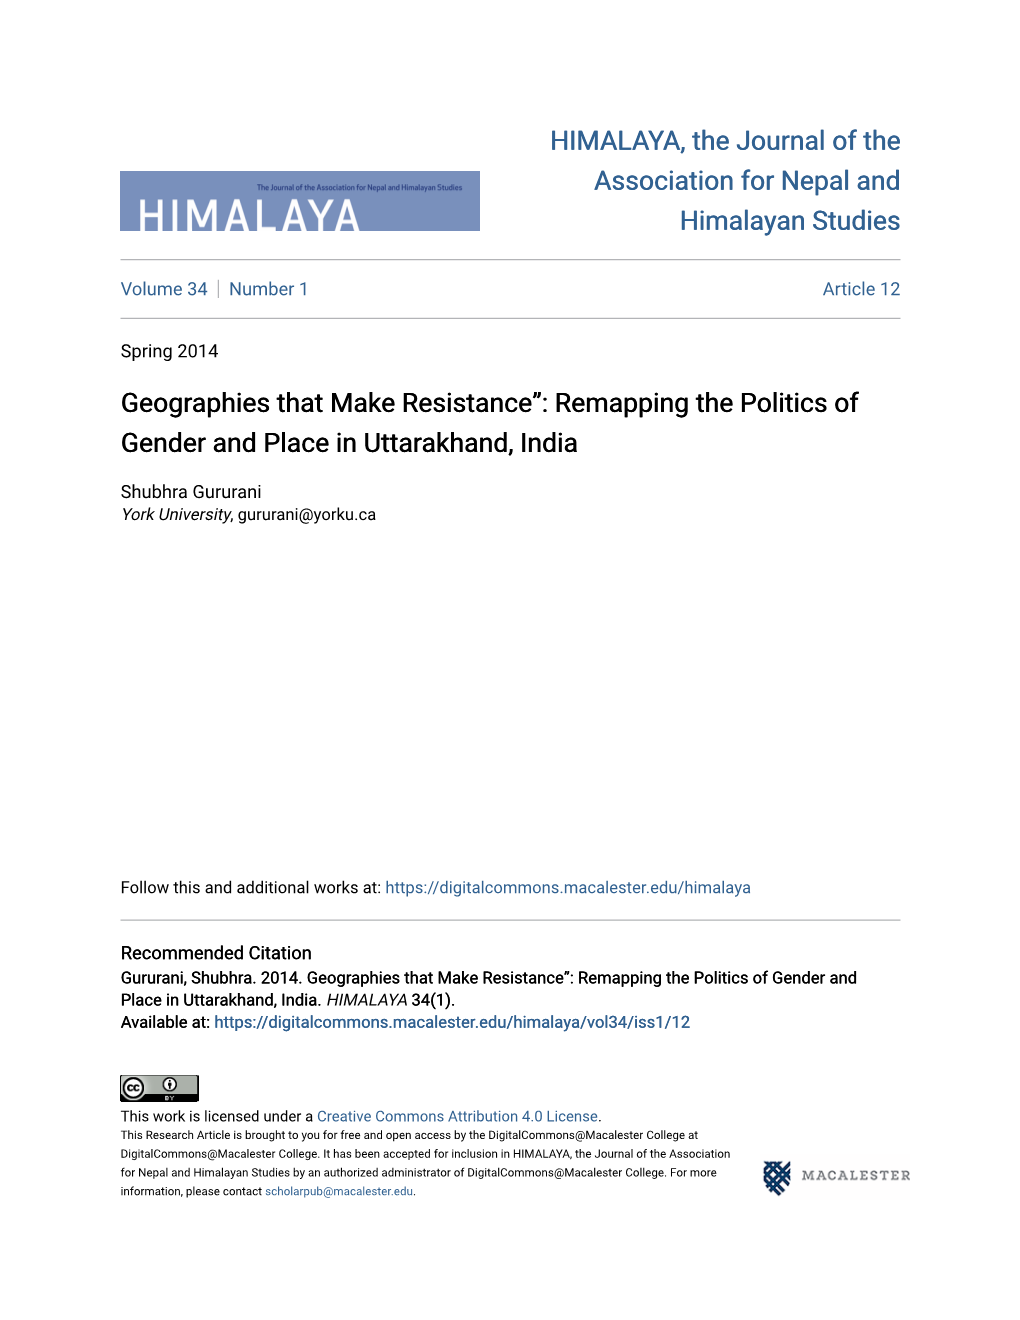 Geographies That Make Resistance”: Remapping the Politics of Gender and Place in Uttarakhand, India